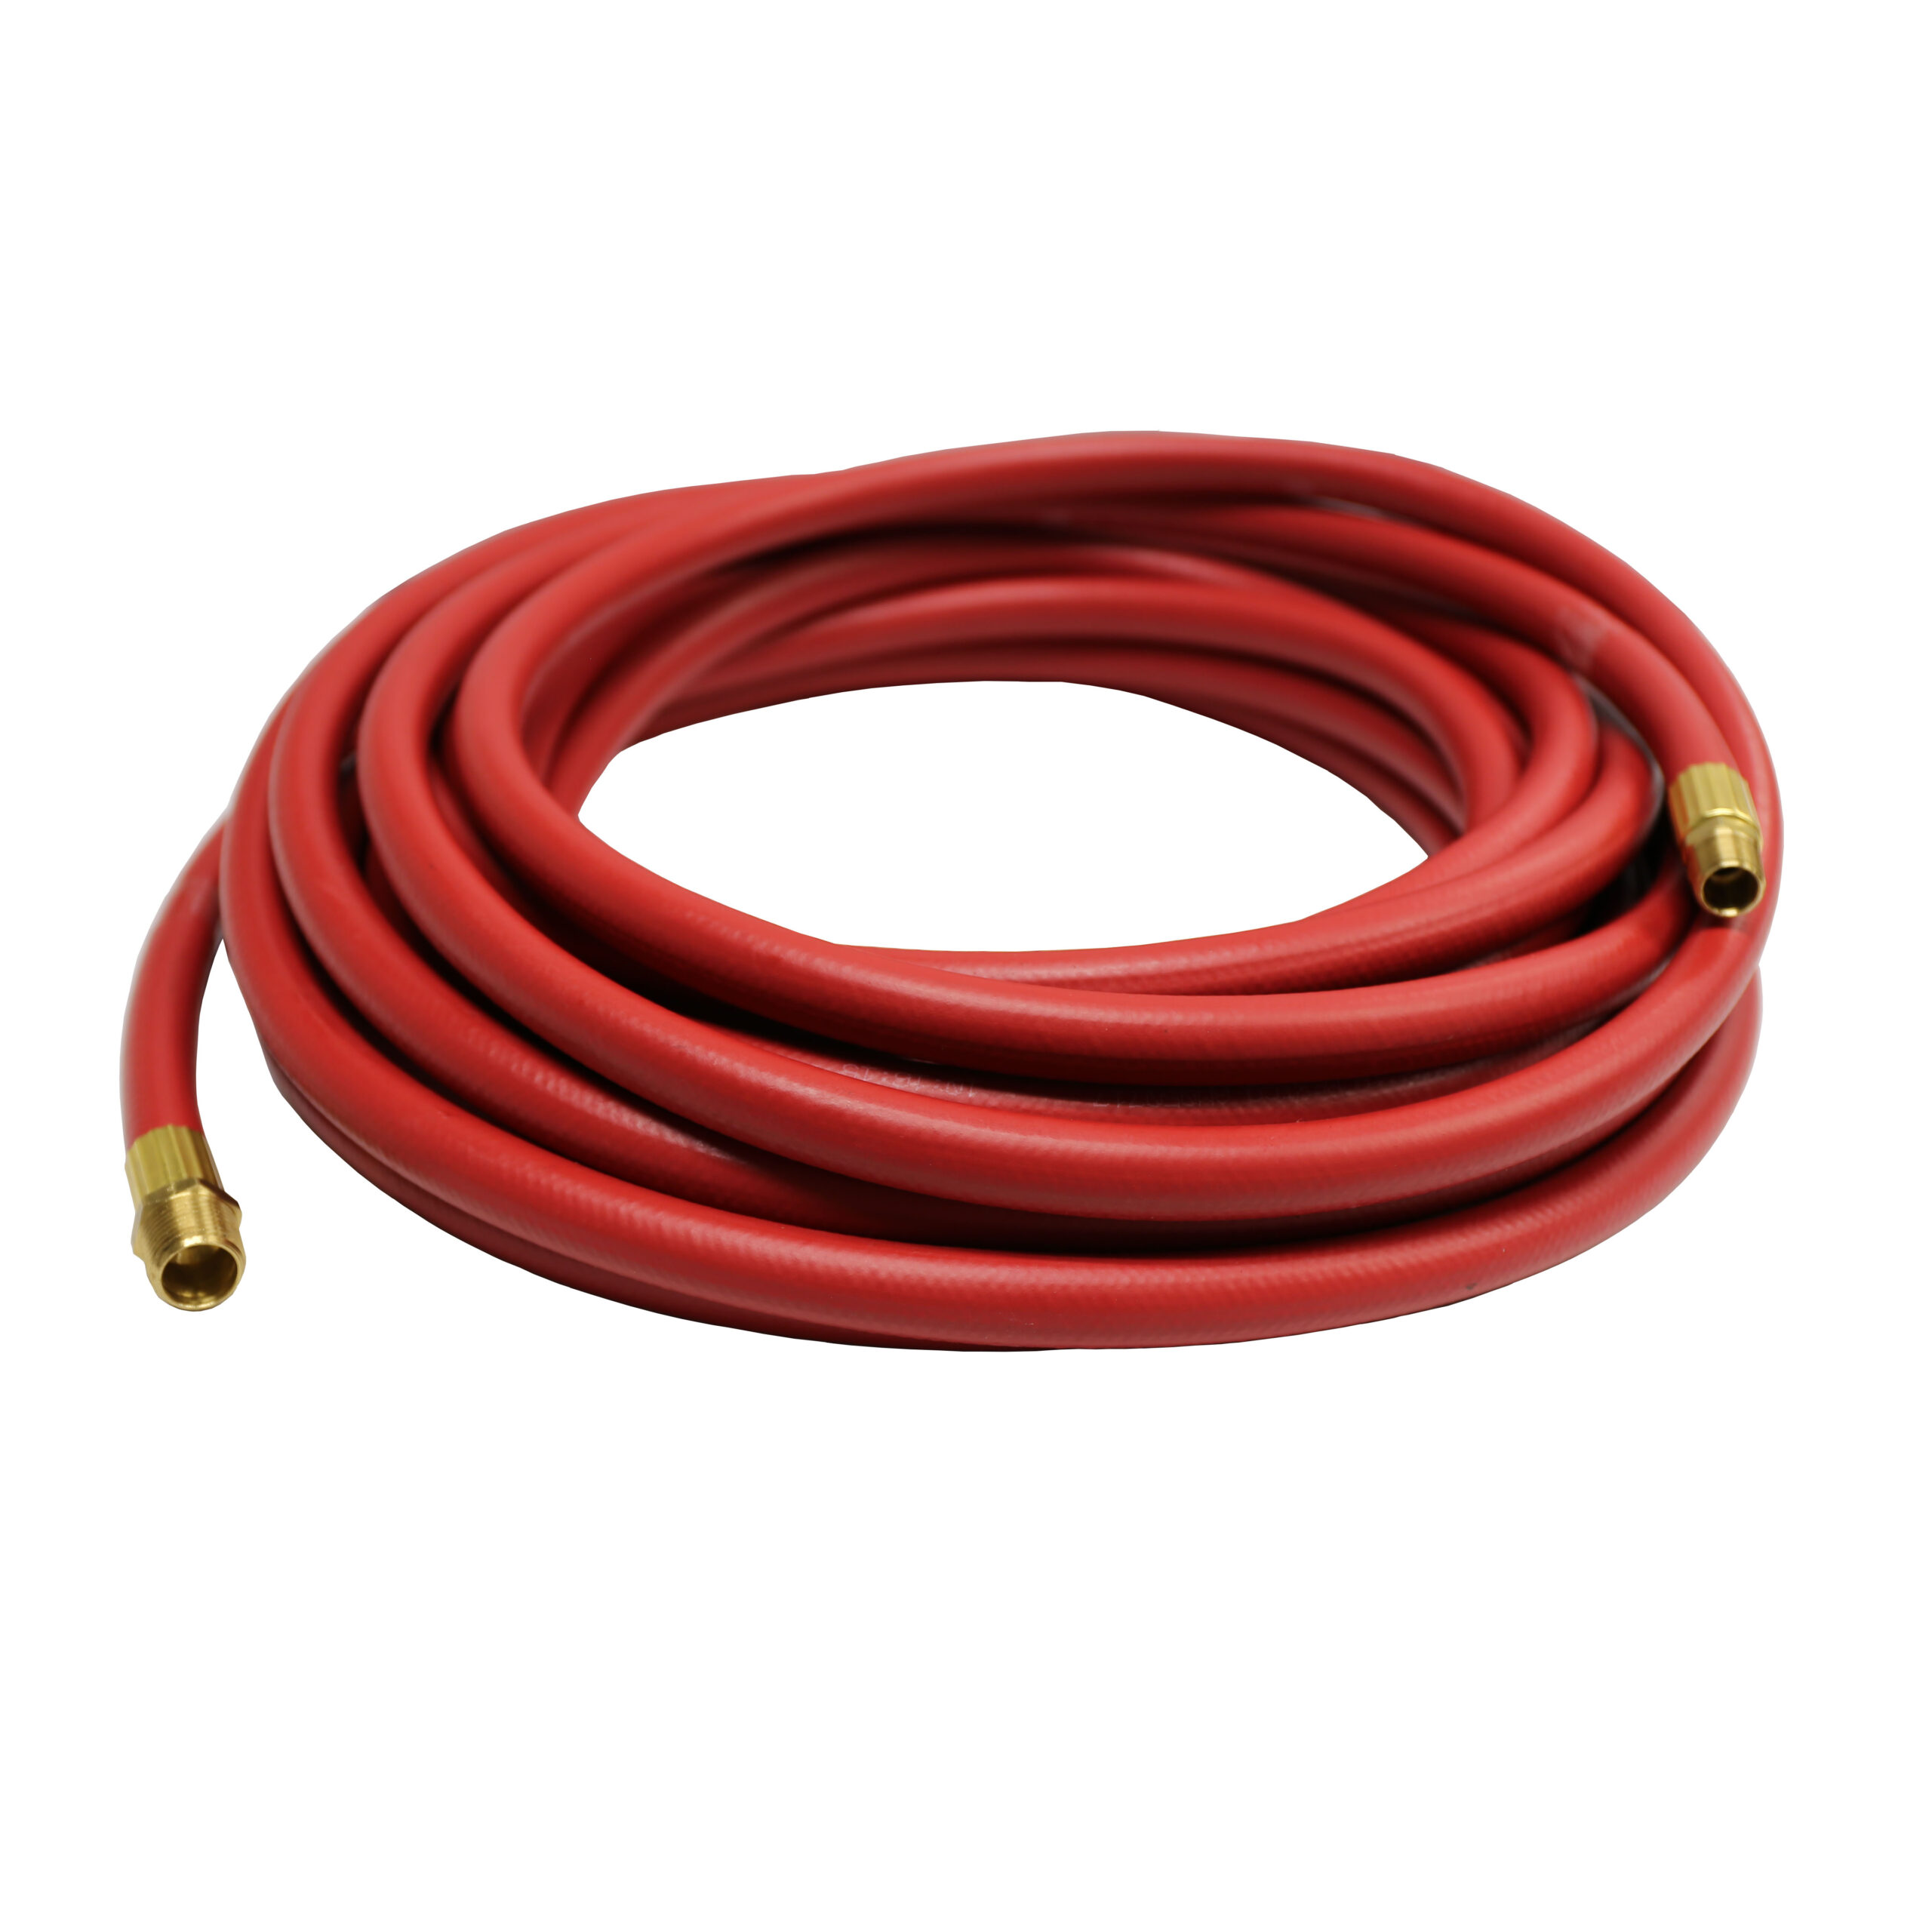 Reelcraft 601146-25 - 3/4 in. x 25 ft. Low Pressure Rubber Air Hose